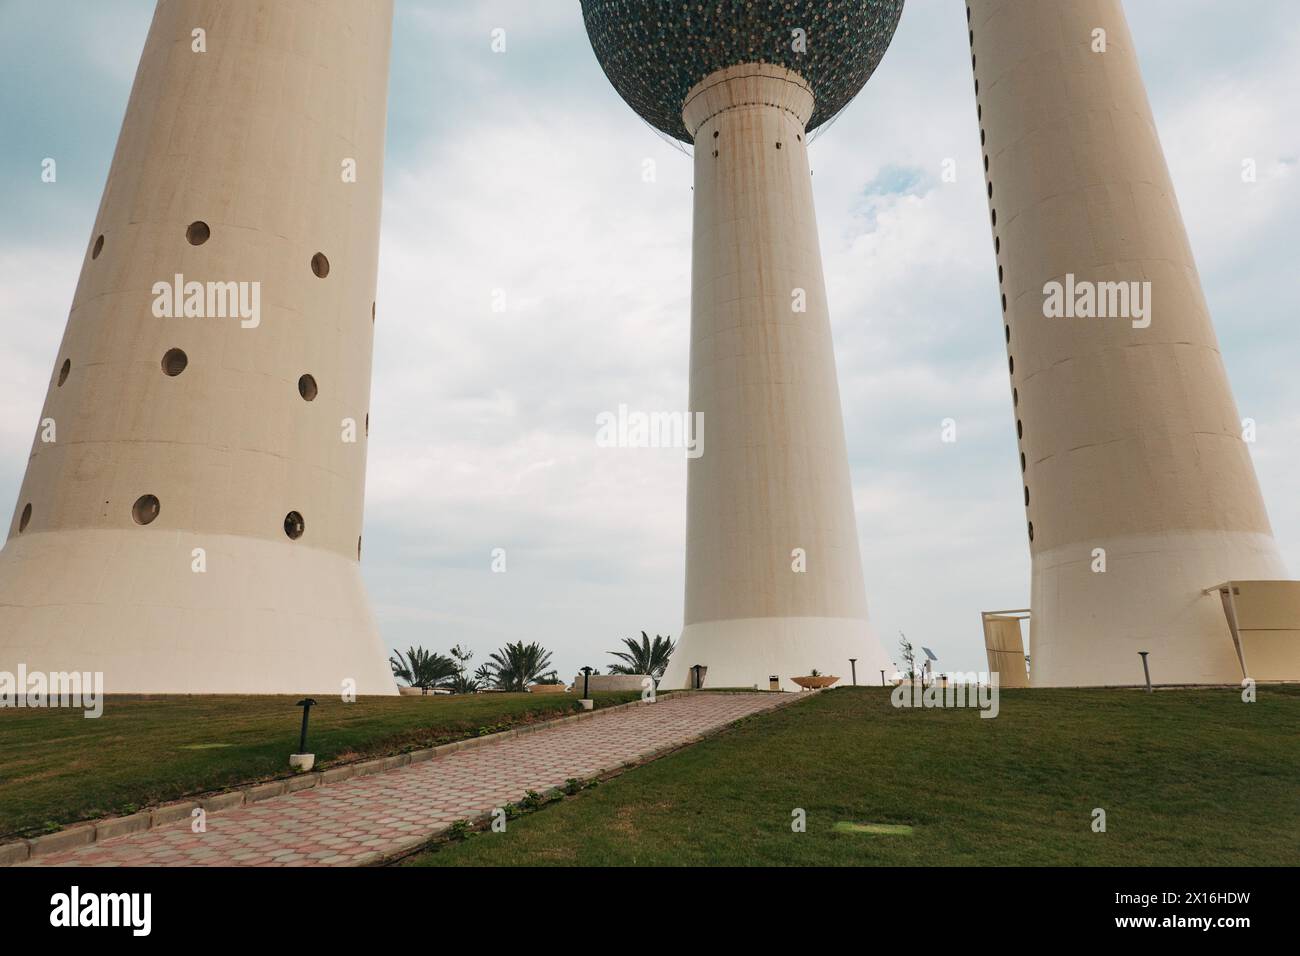 the Kuwait Towers, three towers supporting spherical structures in Kuwait City Stock Photo